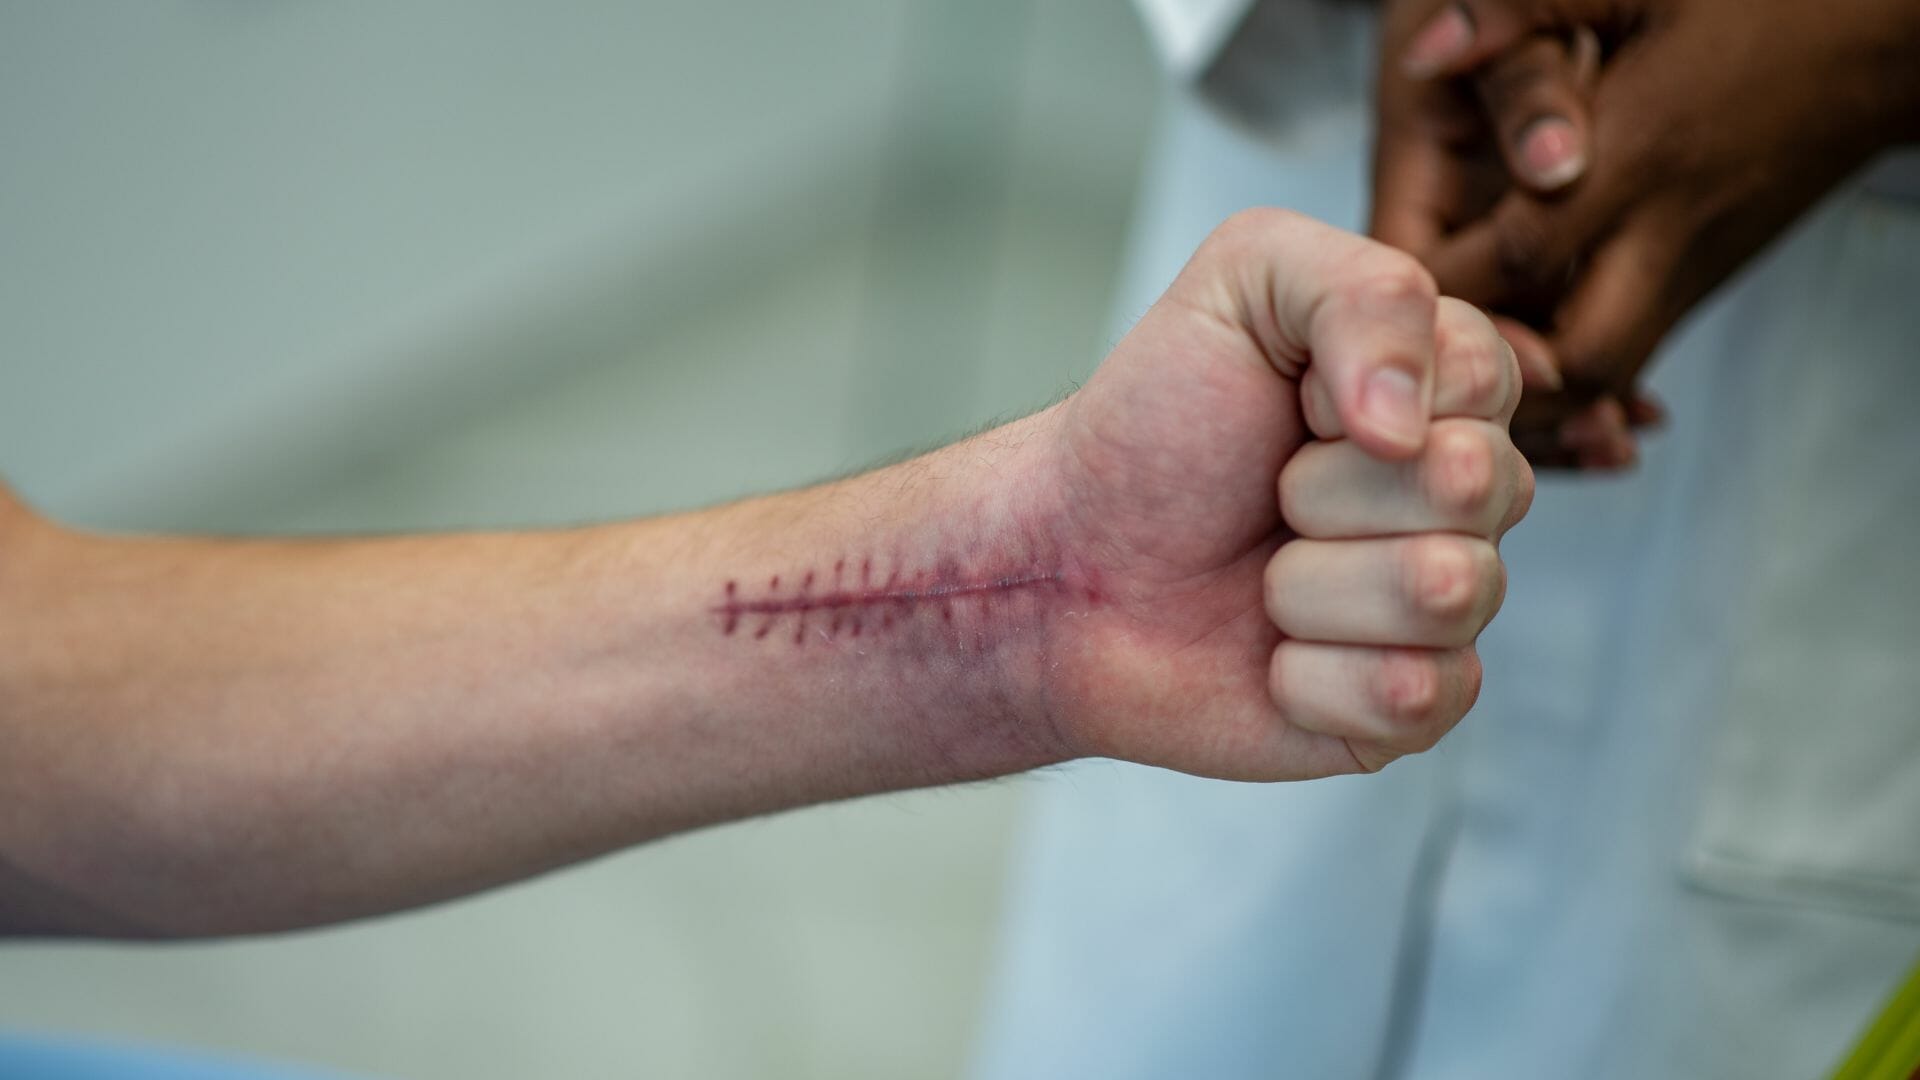 Compensation for Scar Injuries